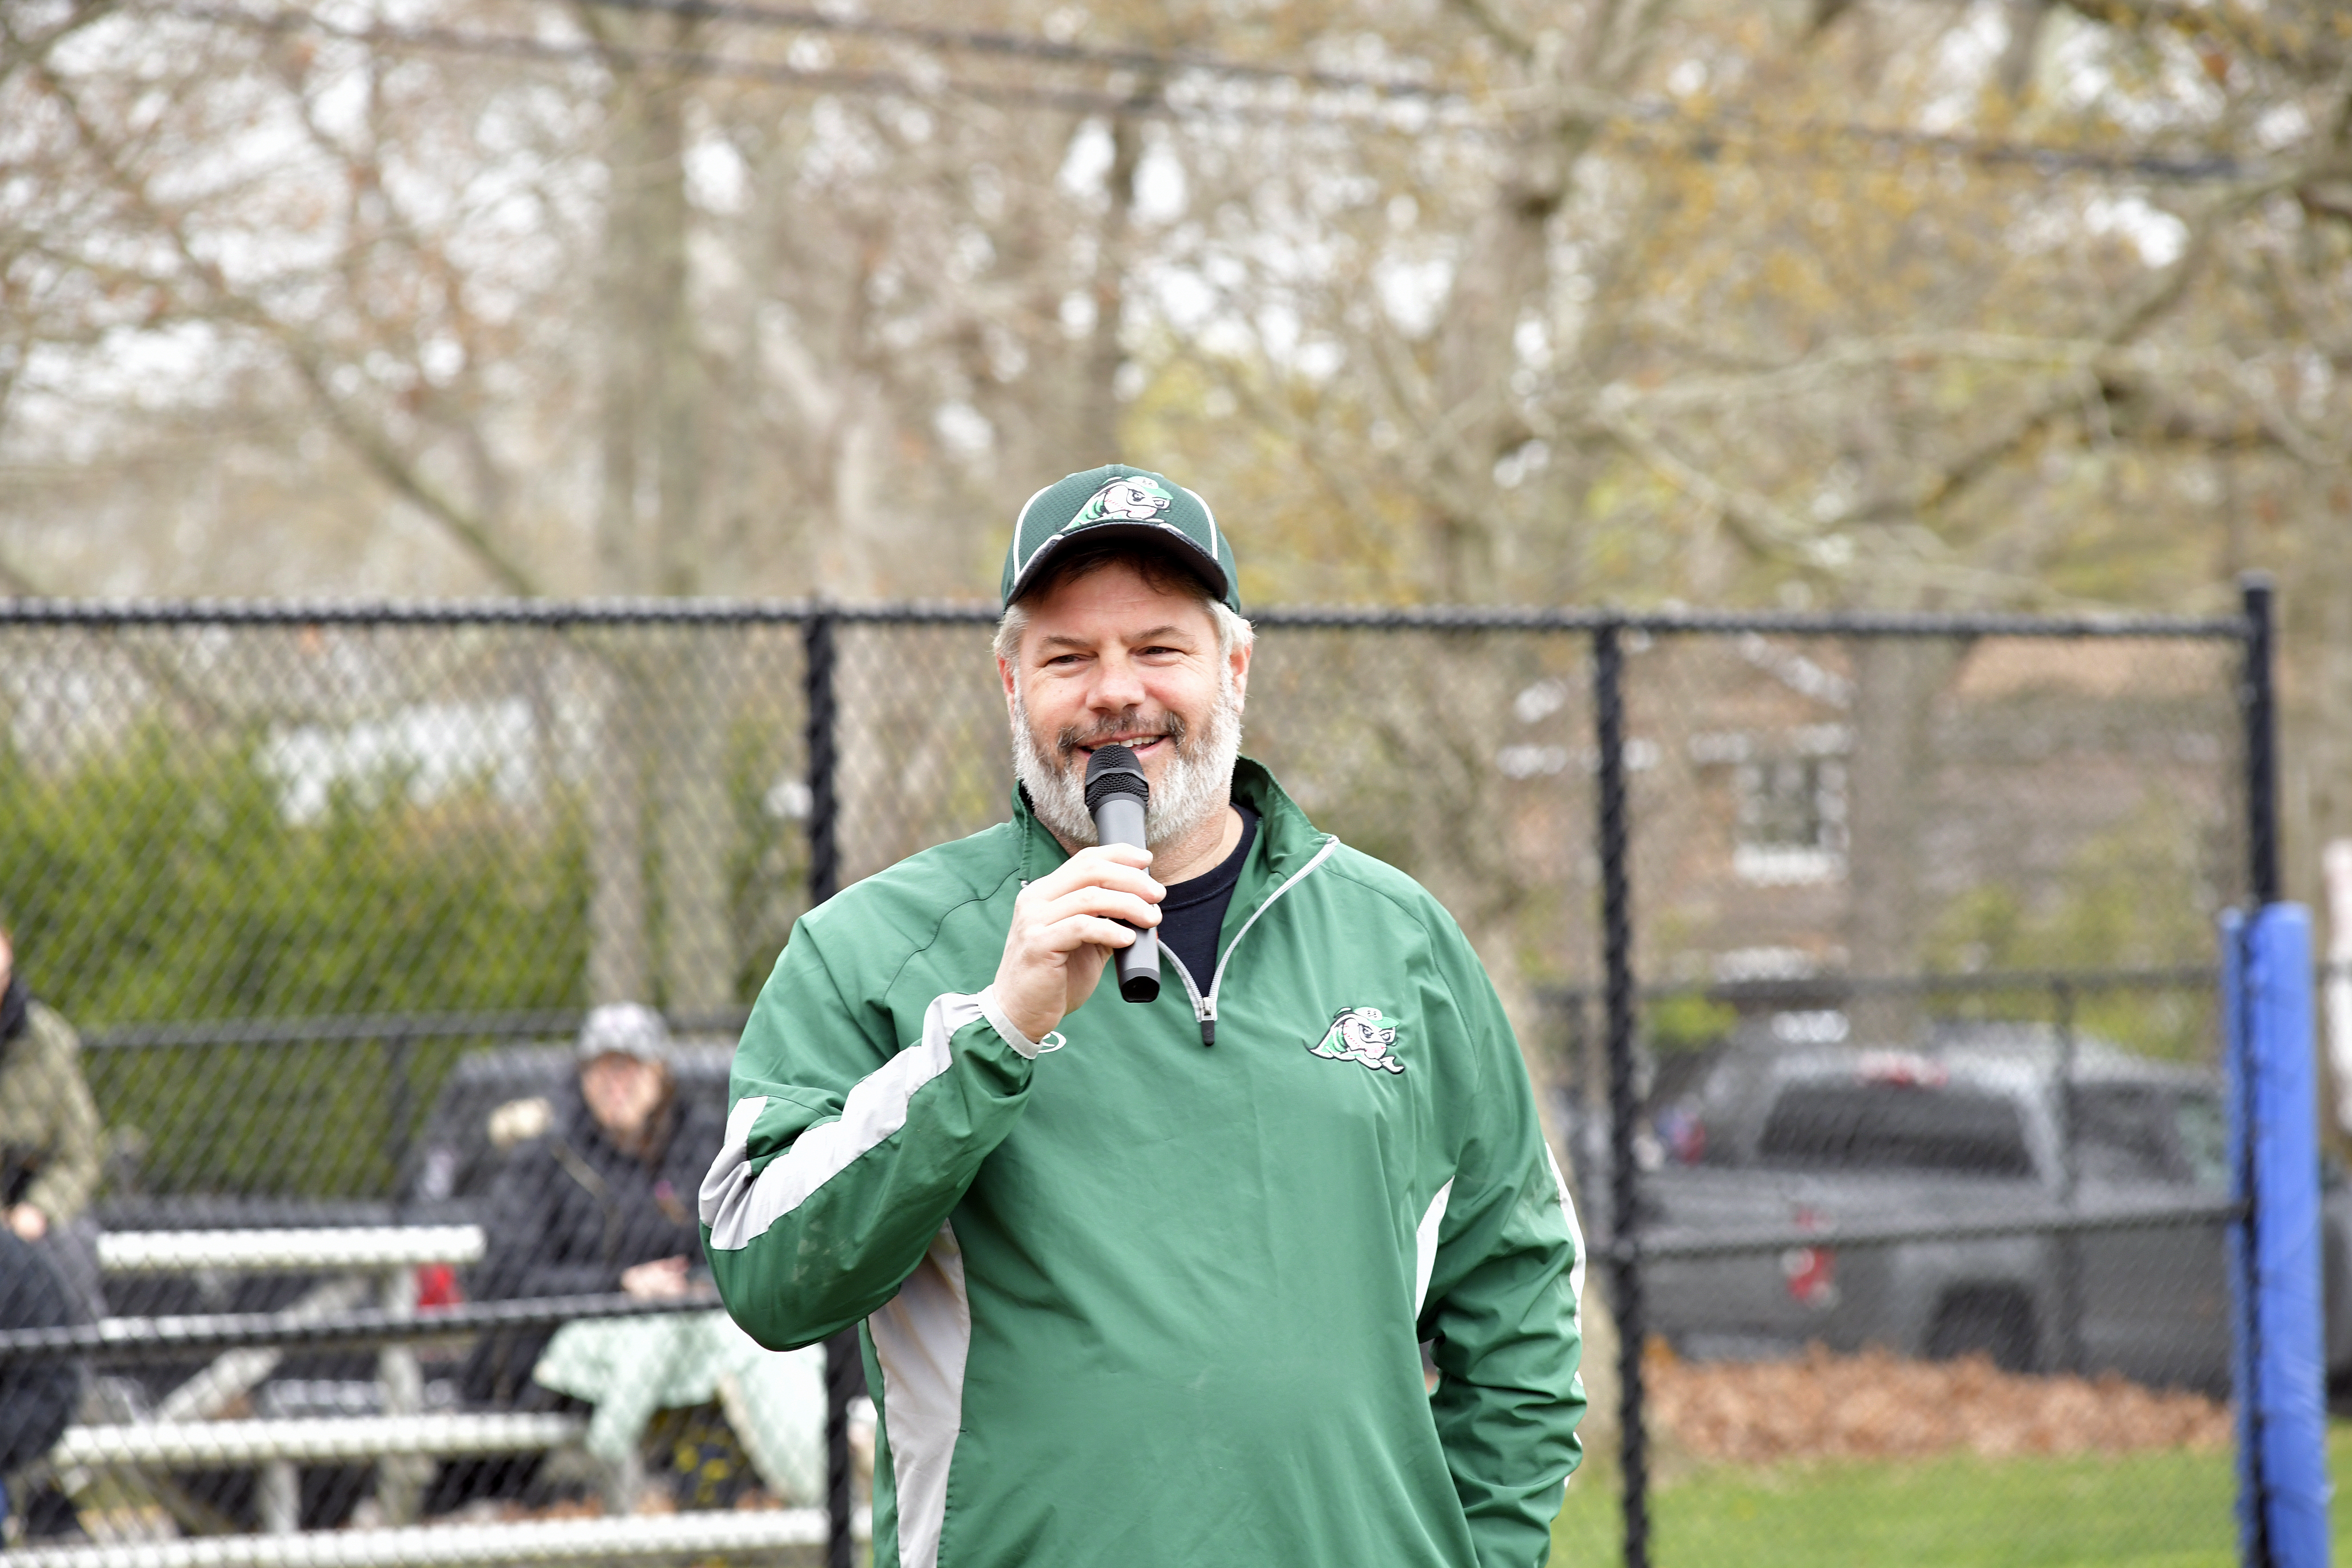 Bill Dawson, East End Little League president, welcomes the crowd.